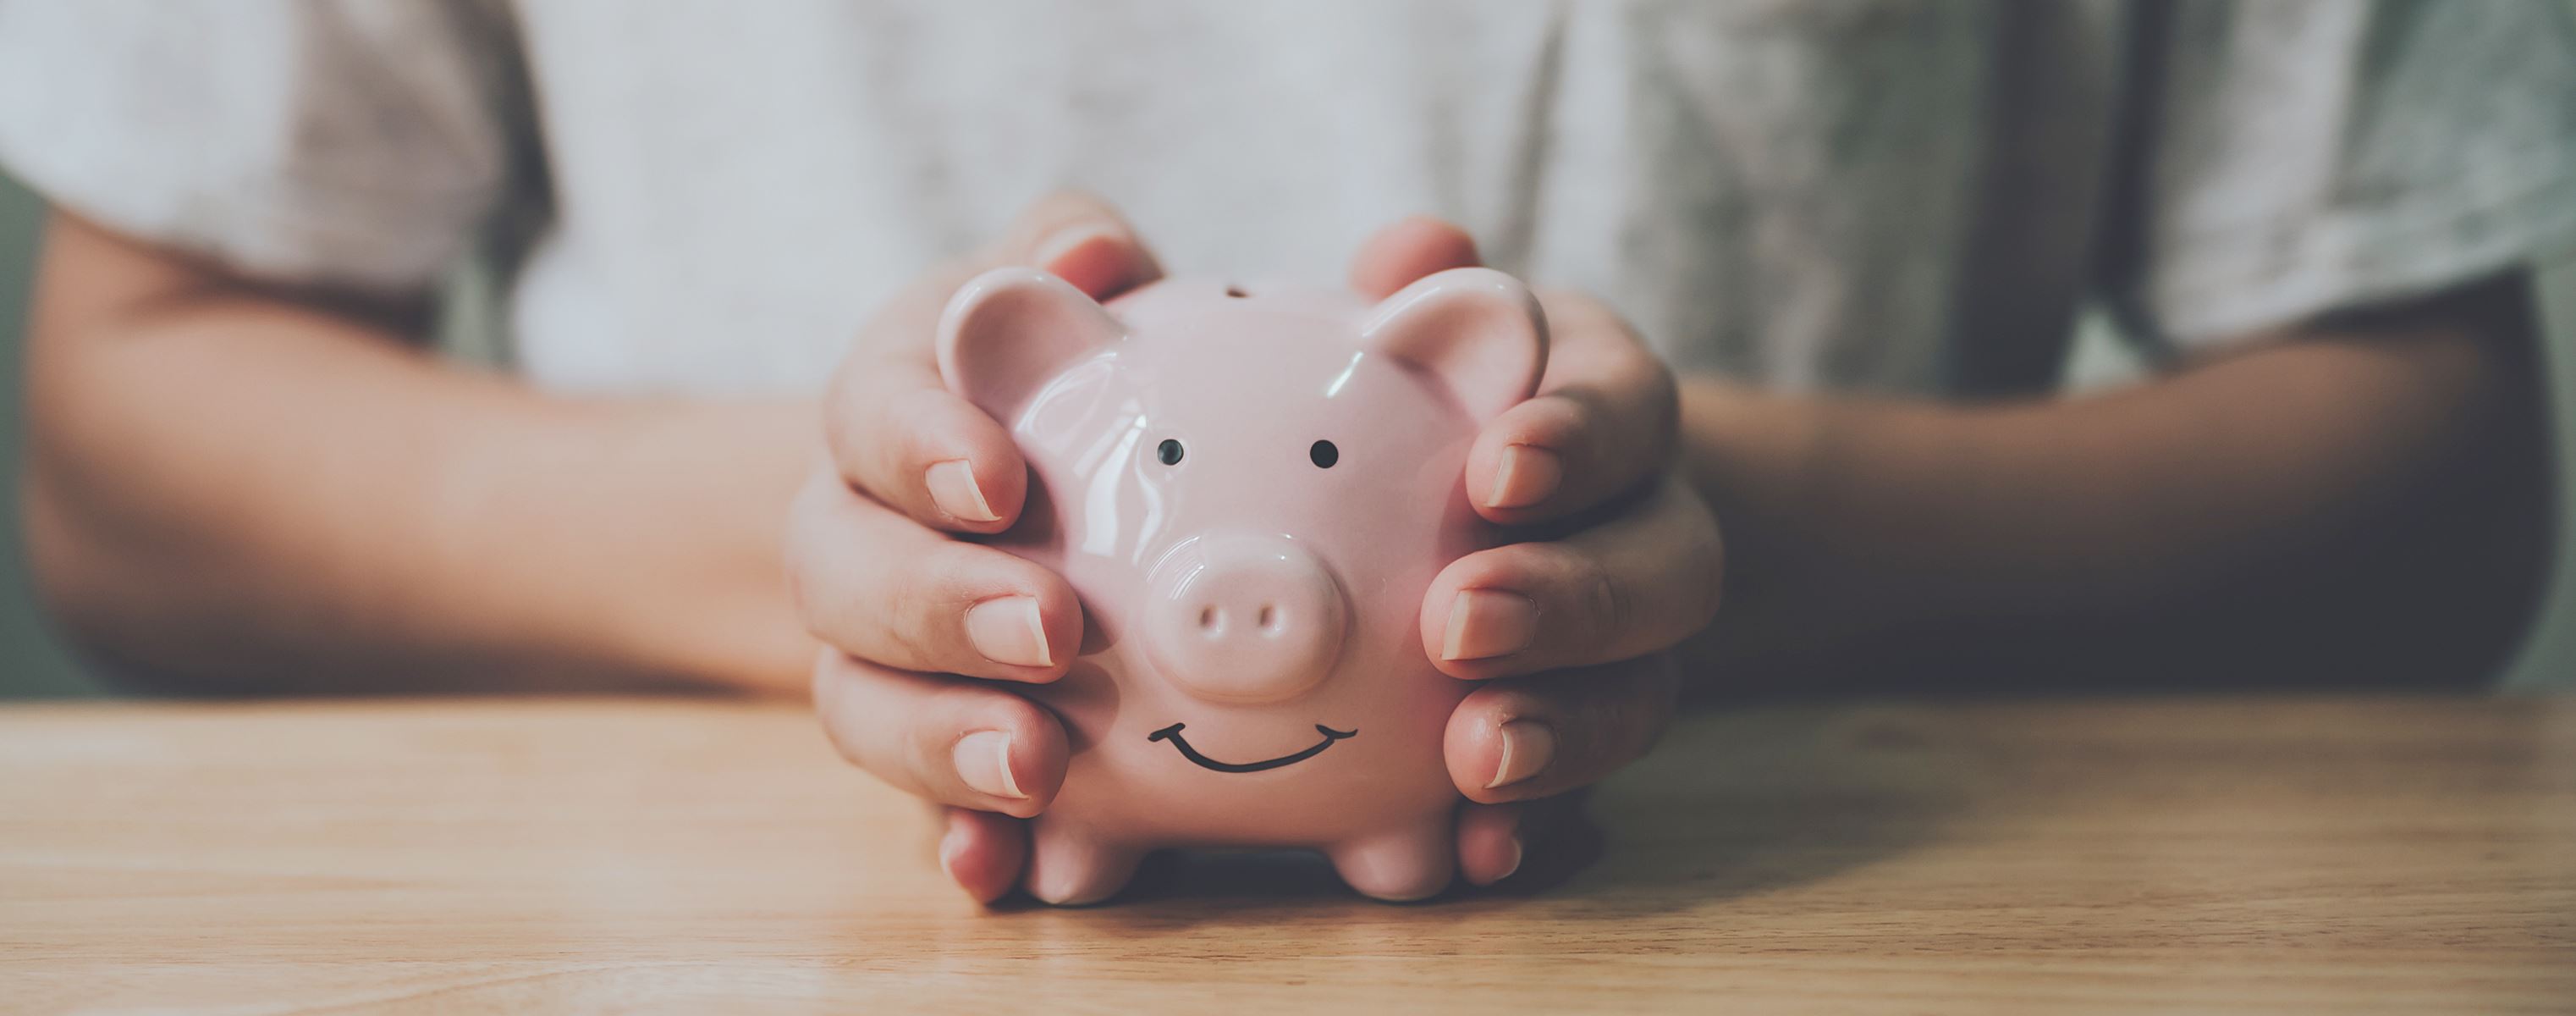 Womans hands holding a pink smiling piggy bank 